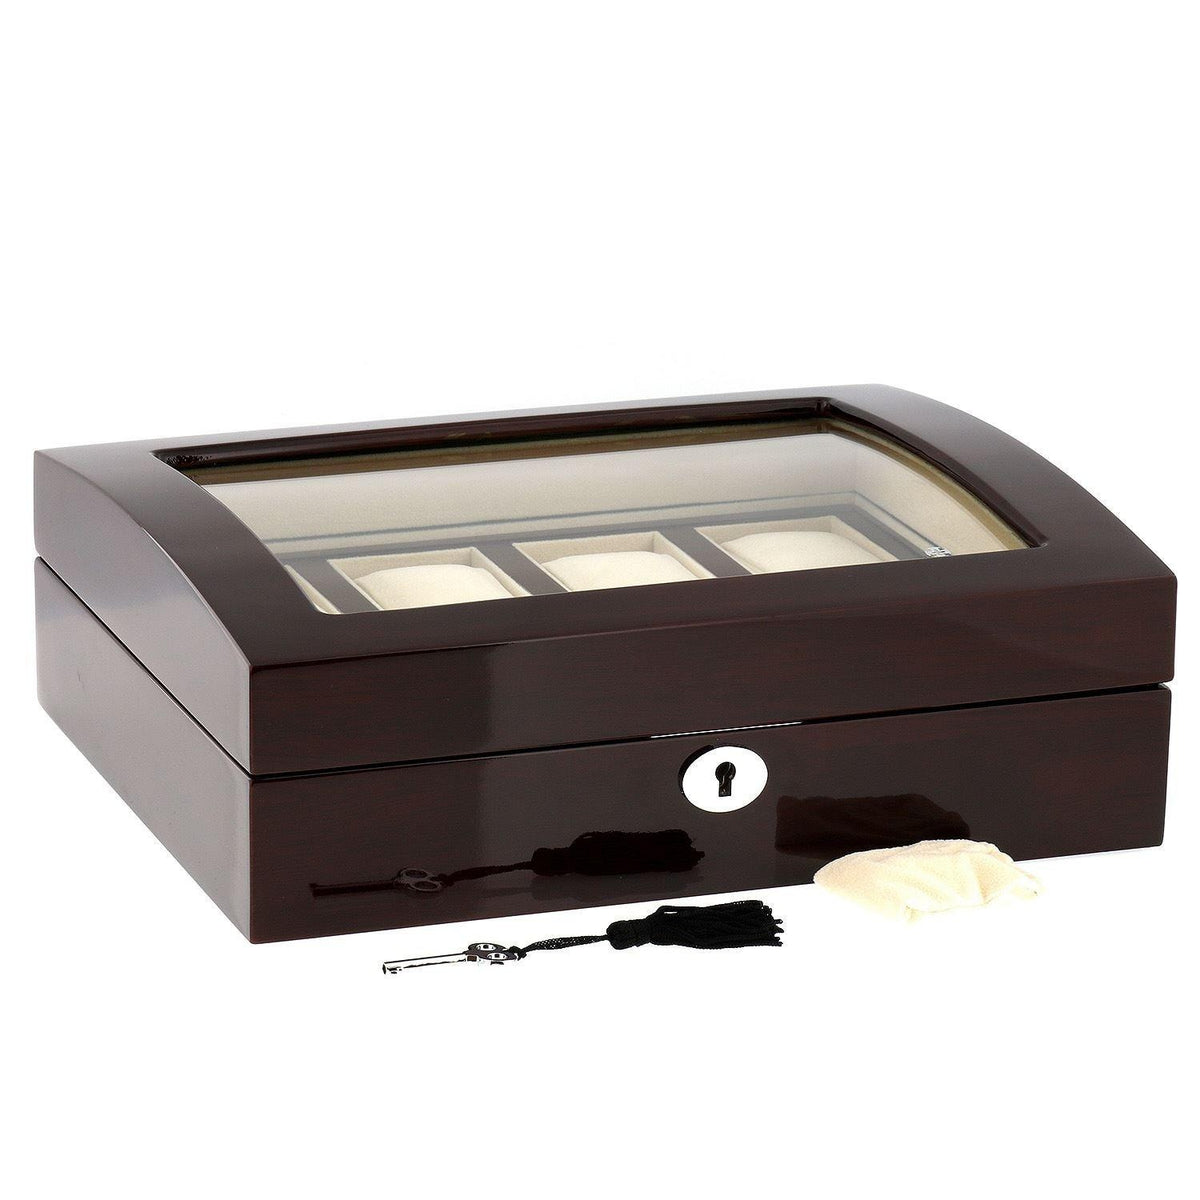 High Quality Watch Collectors Box for 8 Watches with Mahogany Veneer High Gloss Finish by Tempus